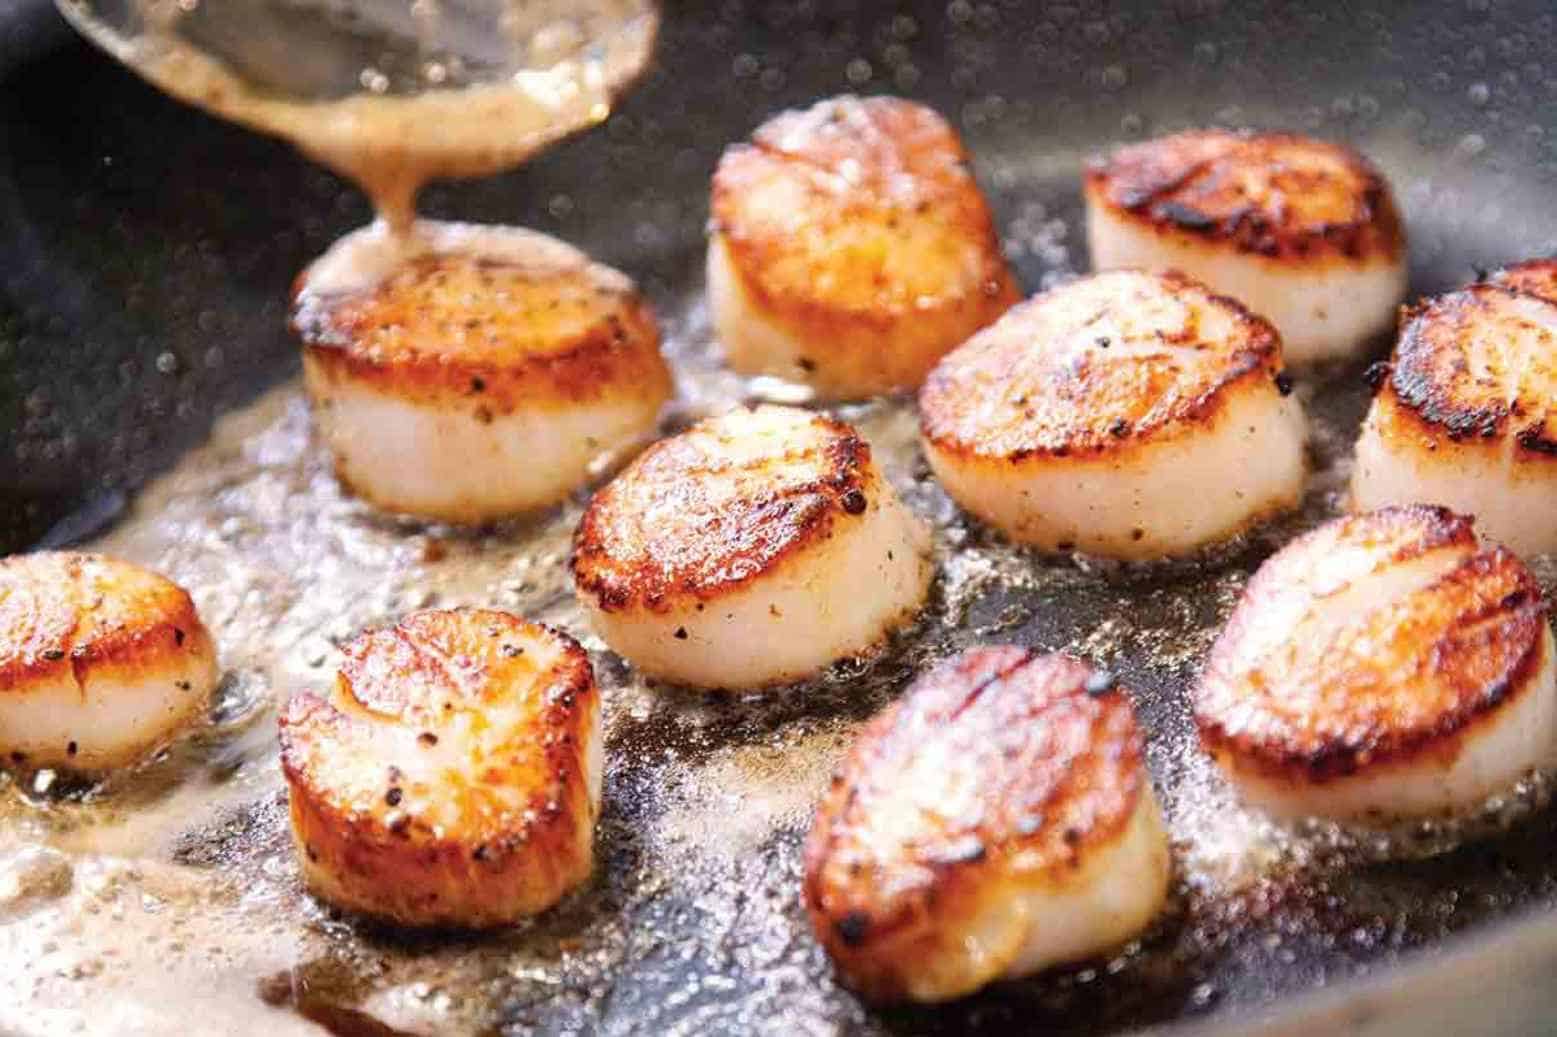 Best Side Dishes For Scallops